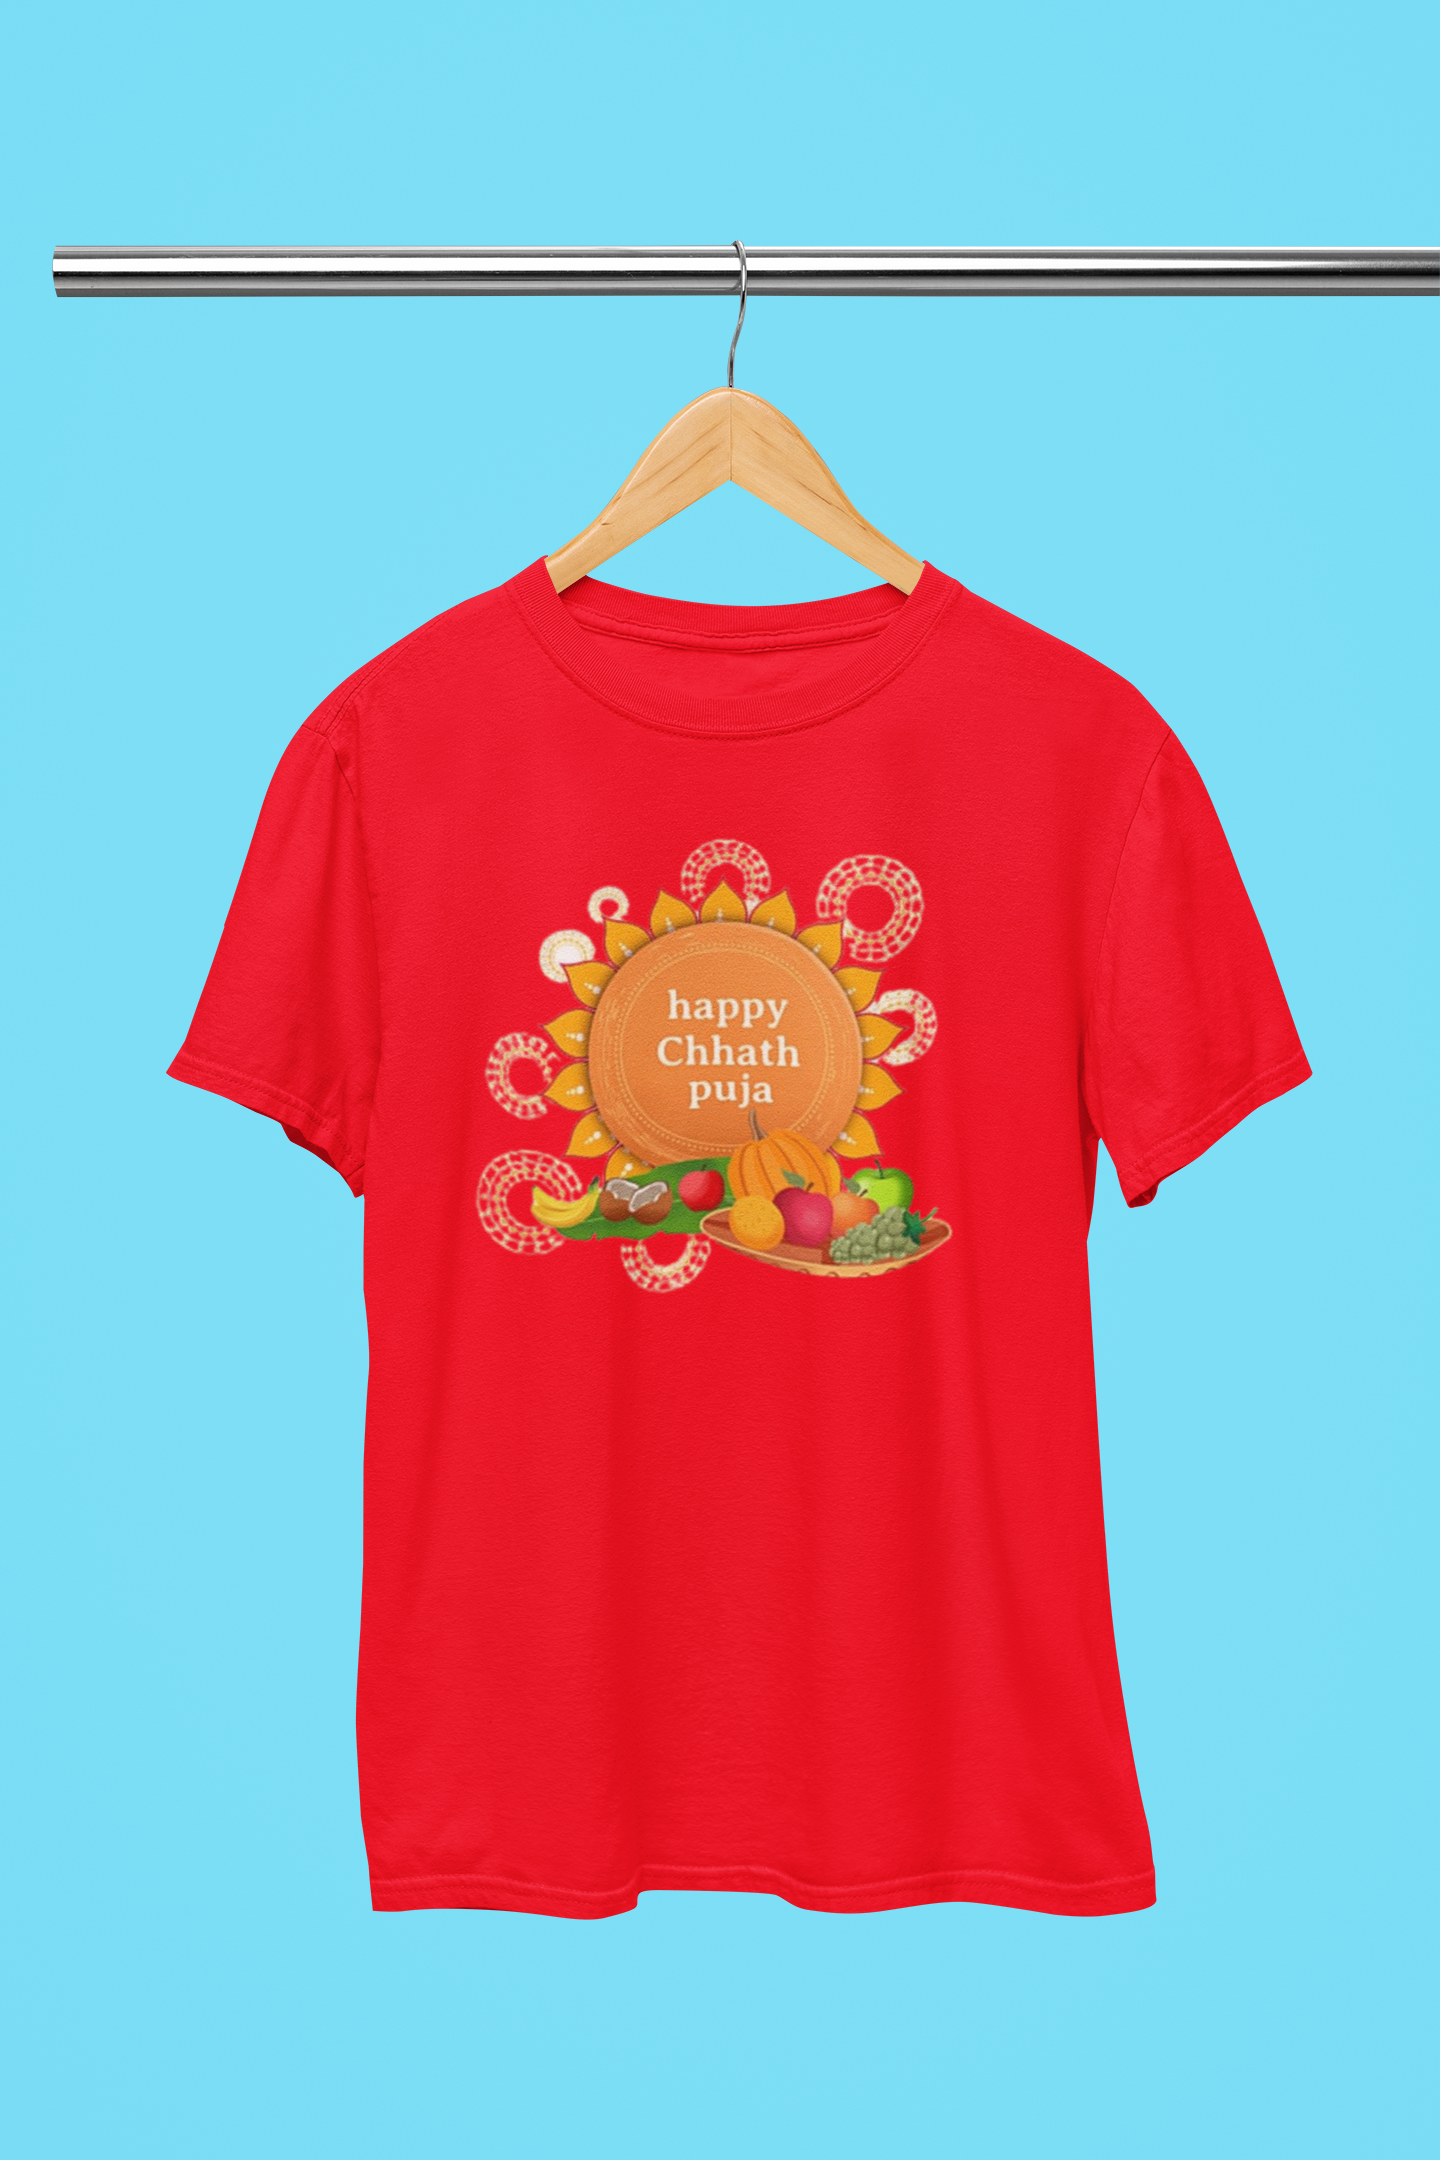 CHHATH PUJA SPECIAL4 T-SHIRT